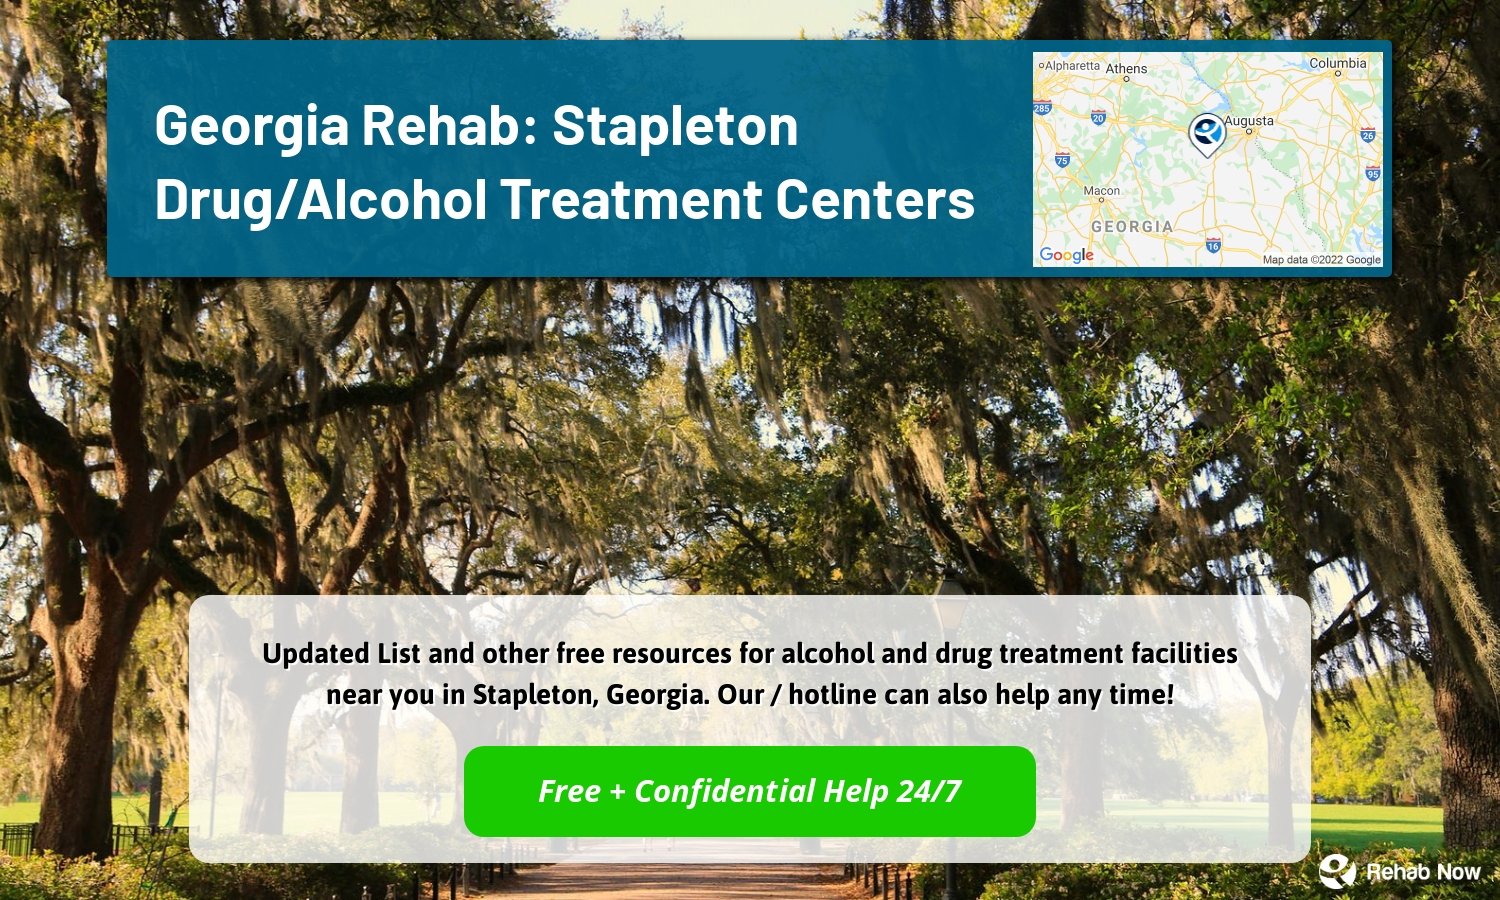  Updated List and other free resources for alcohol and drug treatment facilities near you in Stapleton, Georgia. Our / hotline can also help any time!